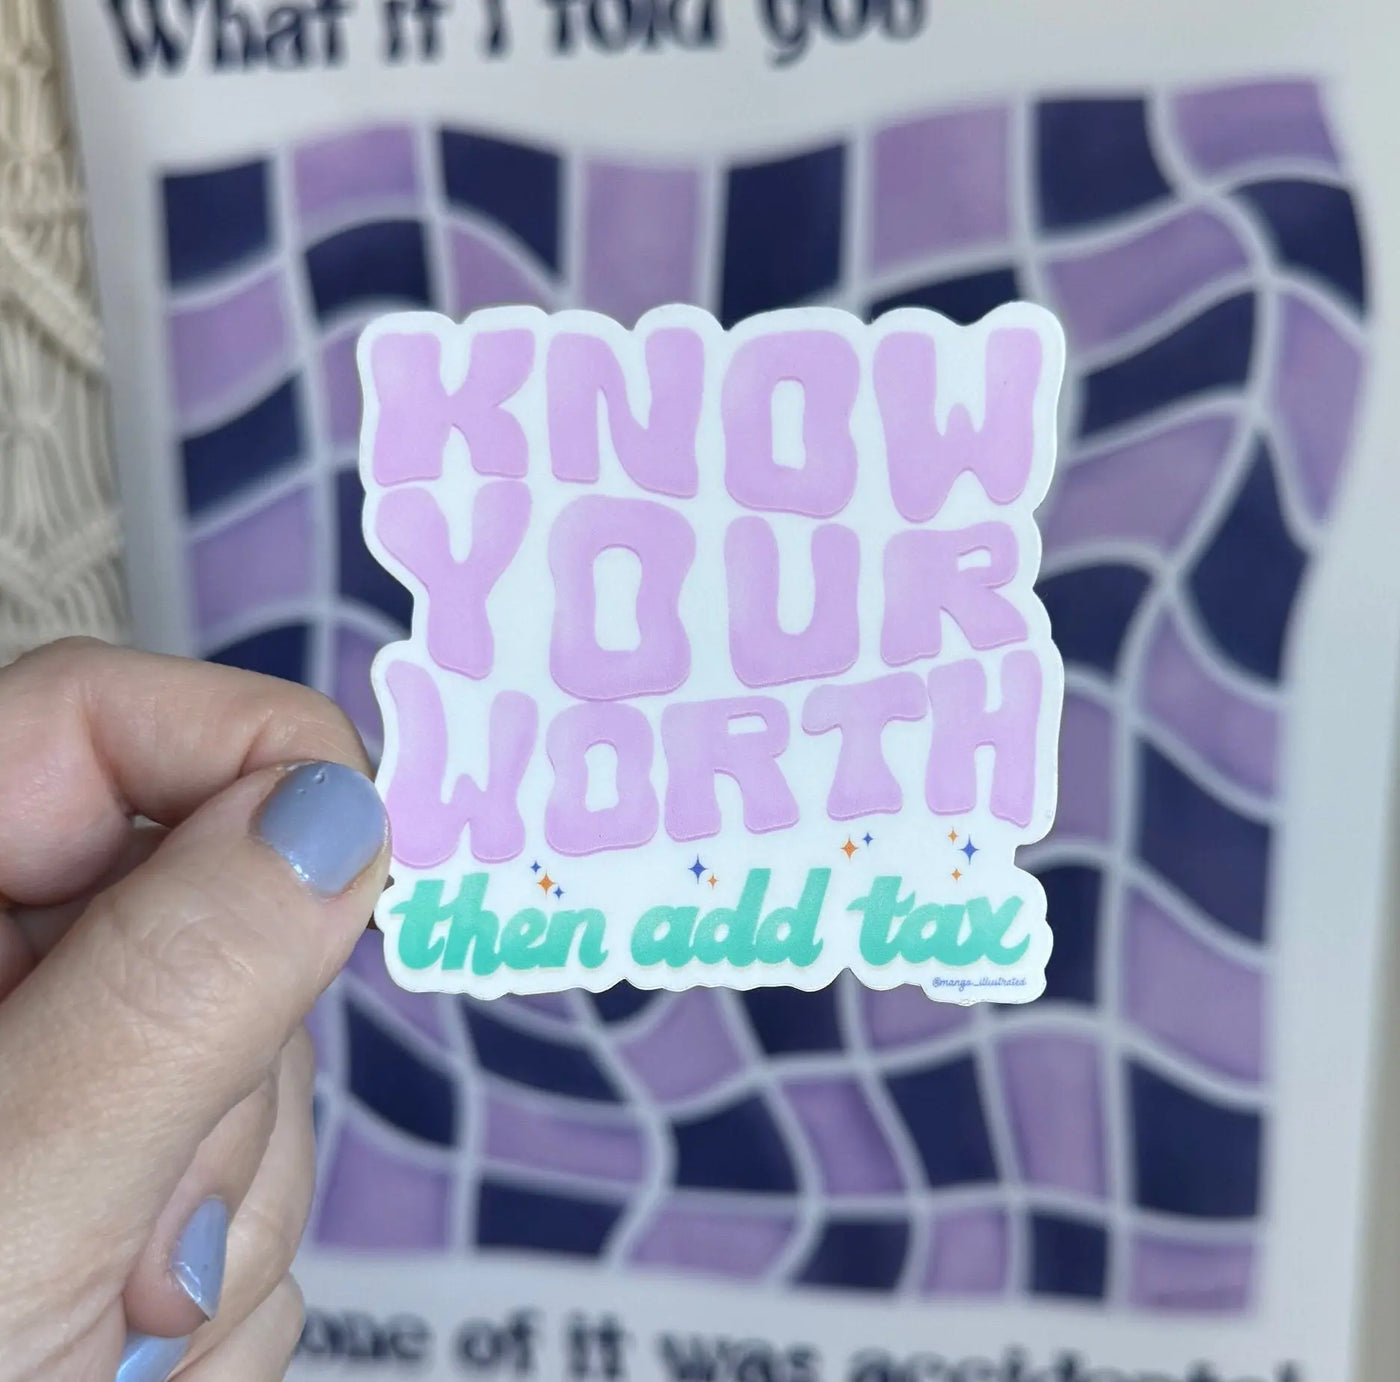 Know your worth then add tax sticker MangoIllustrated